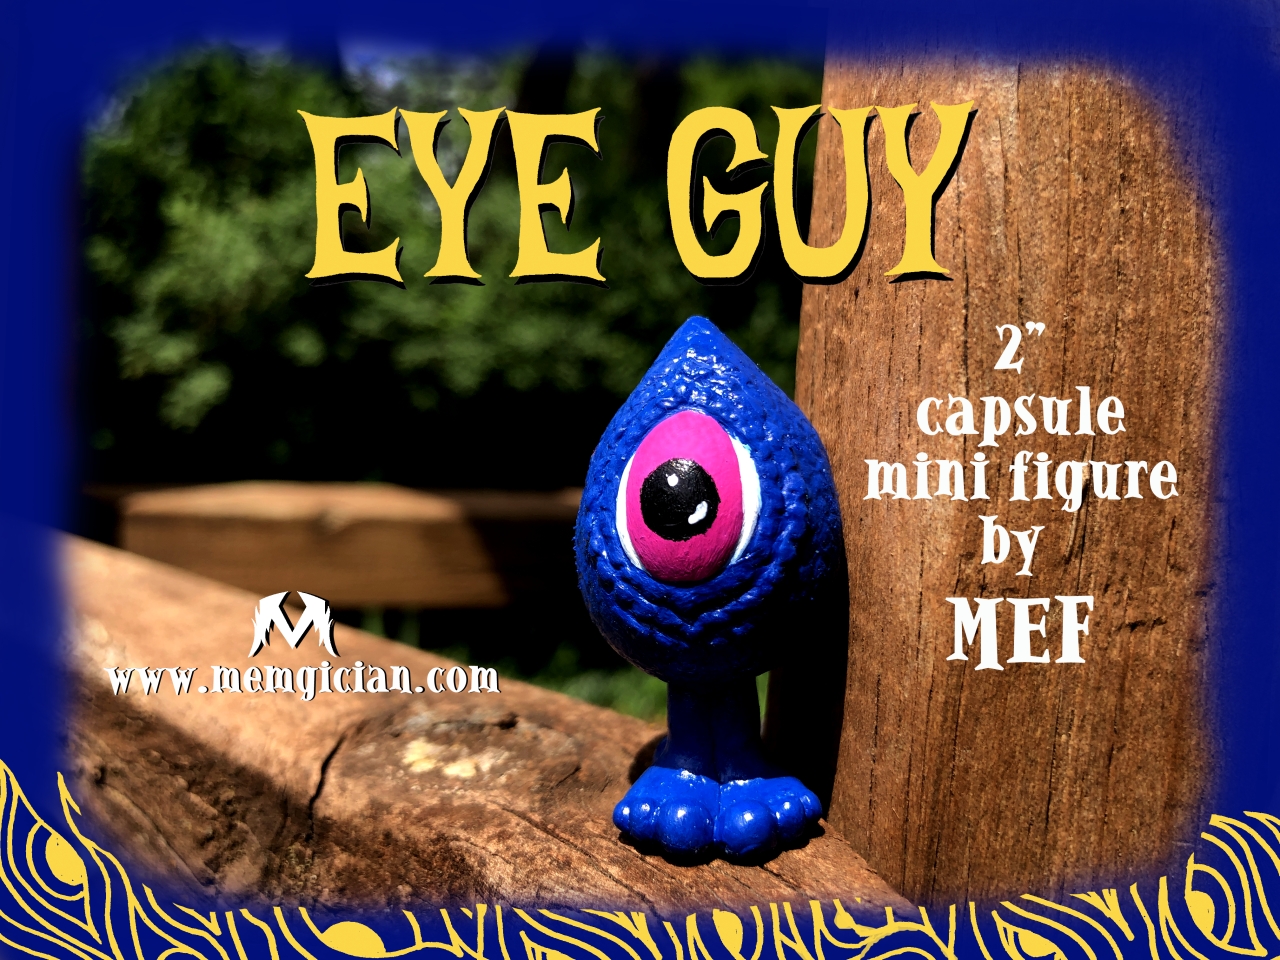 Eye Guy 2 inch mini resin capsule figure by MEF (Michael E. French : No Coast Art Wizard). Order today!